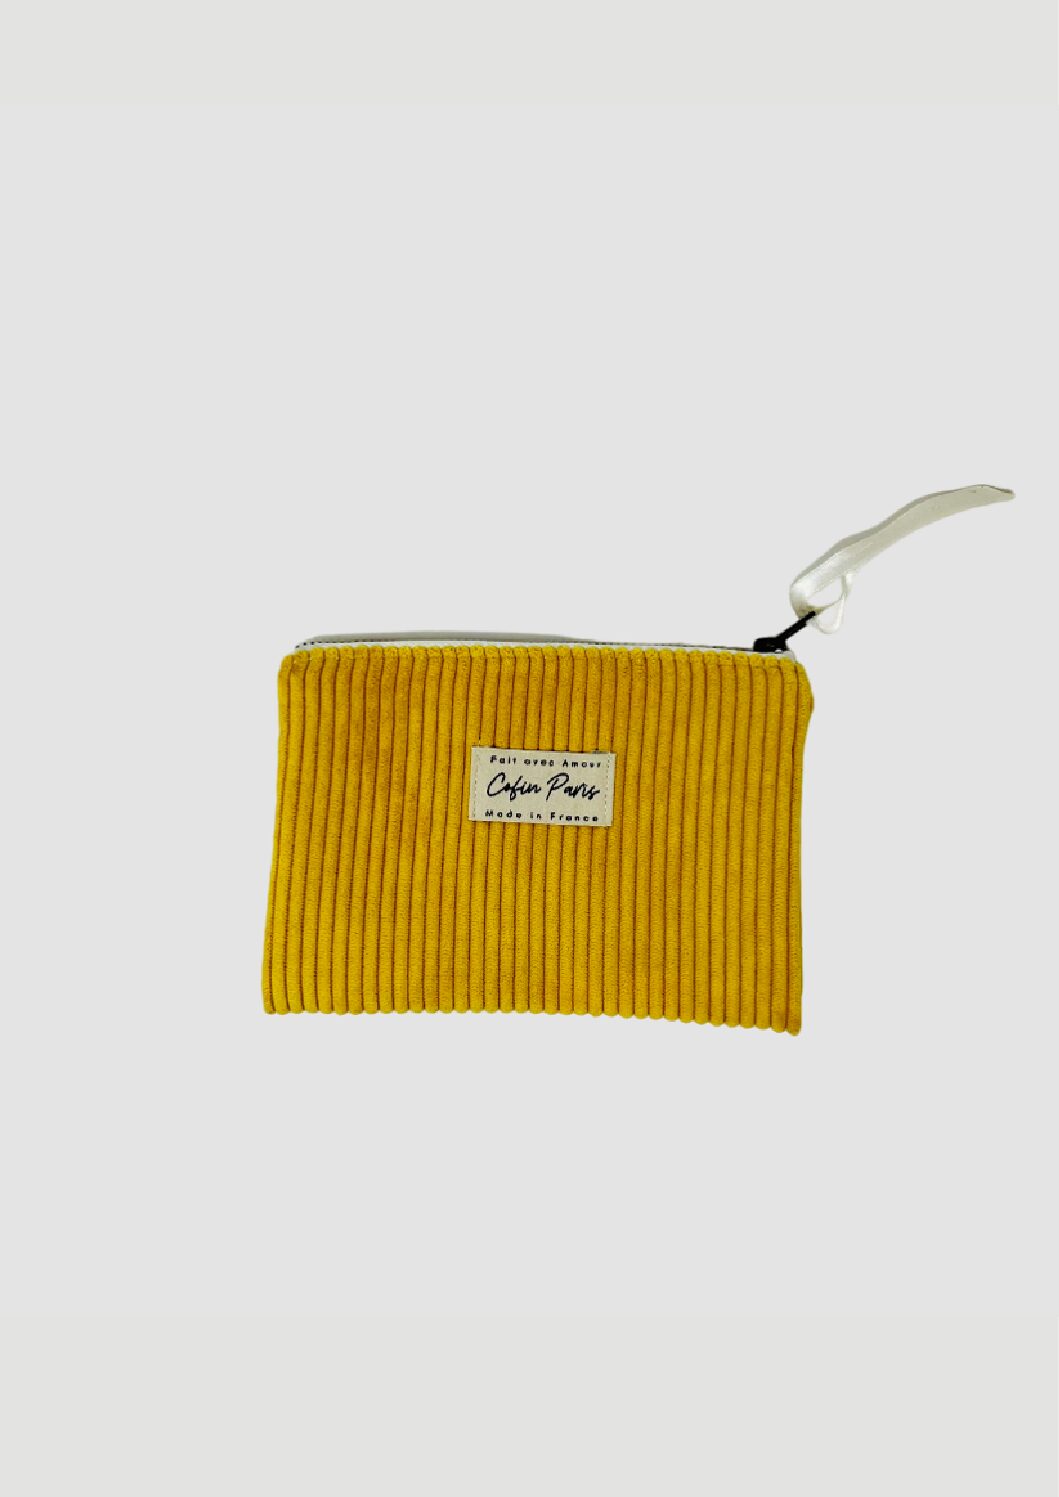 YELLOW PASSPORT POUCH made in France - Louvreuse